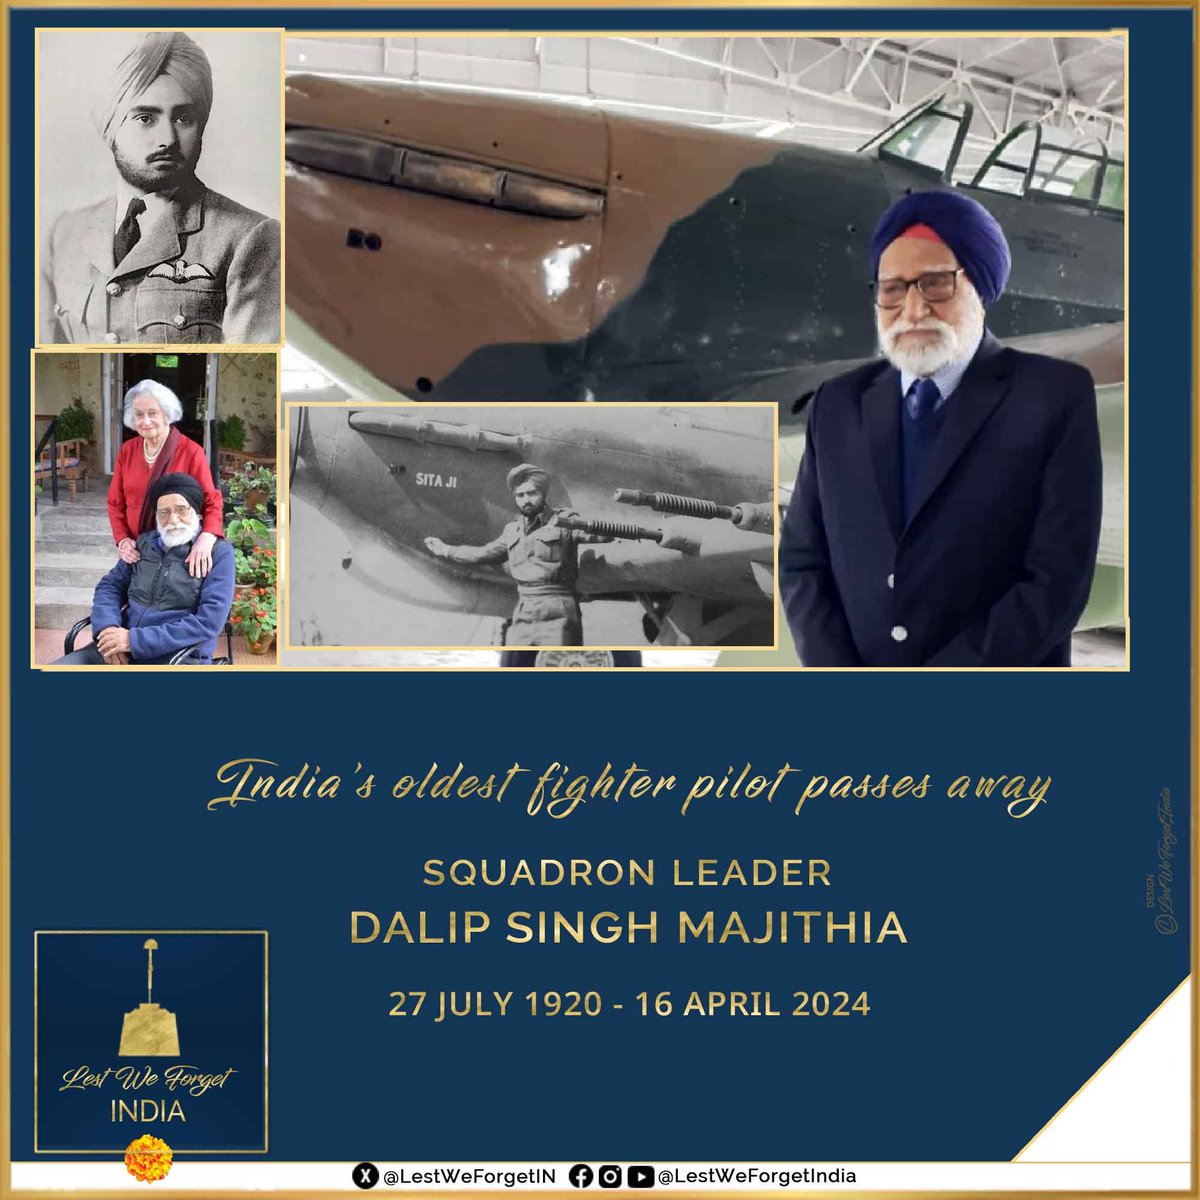 India's oldest fighter pilot passes away #LestWeForgetIndia🇮🇳 Squadron Leader Dalip Singh Majithia passed away early today, 16 April 2024, a few months short of 104 years. Born on 27 July 1920 in Shimla, Sqn Ldr Majithia was commissioned on 01 August 1940 and retired from the